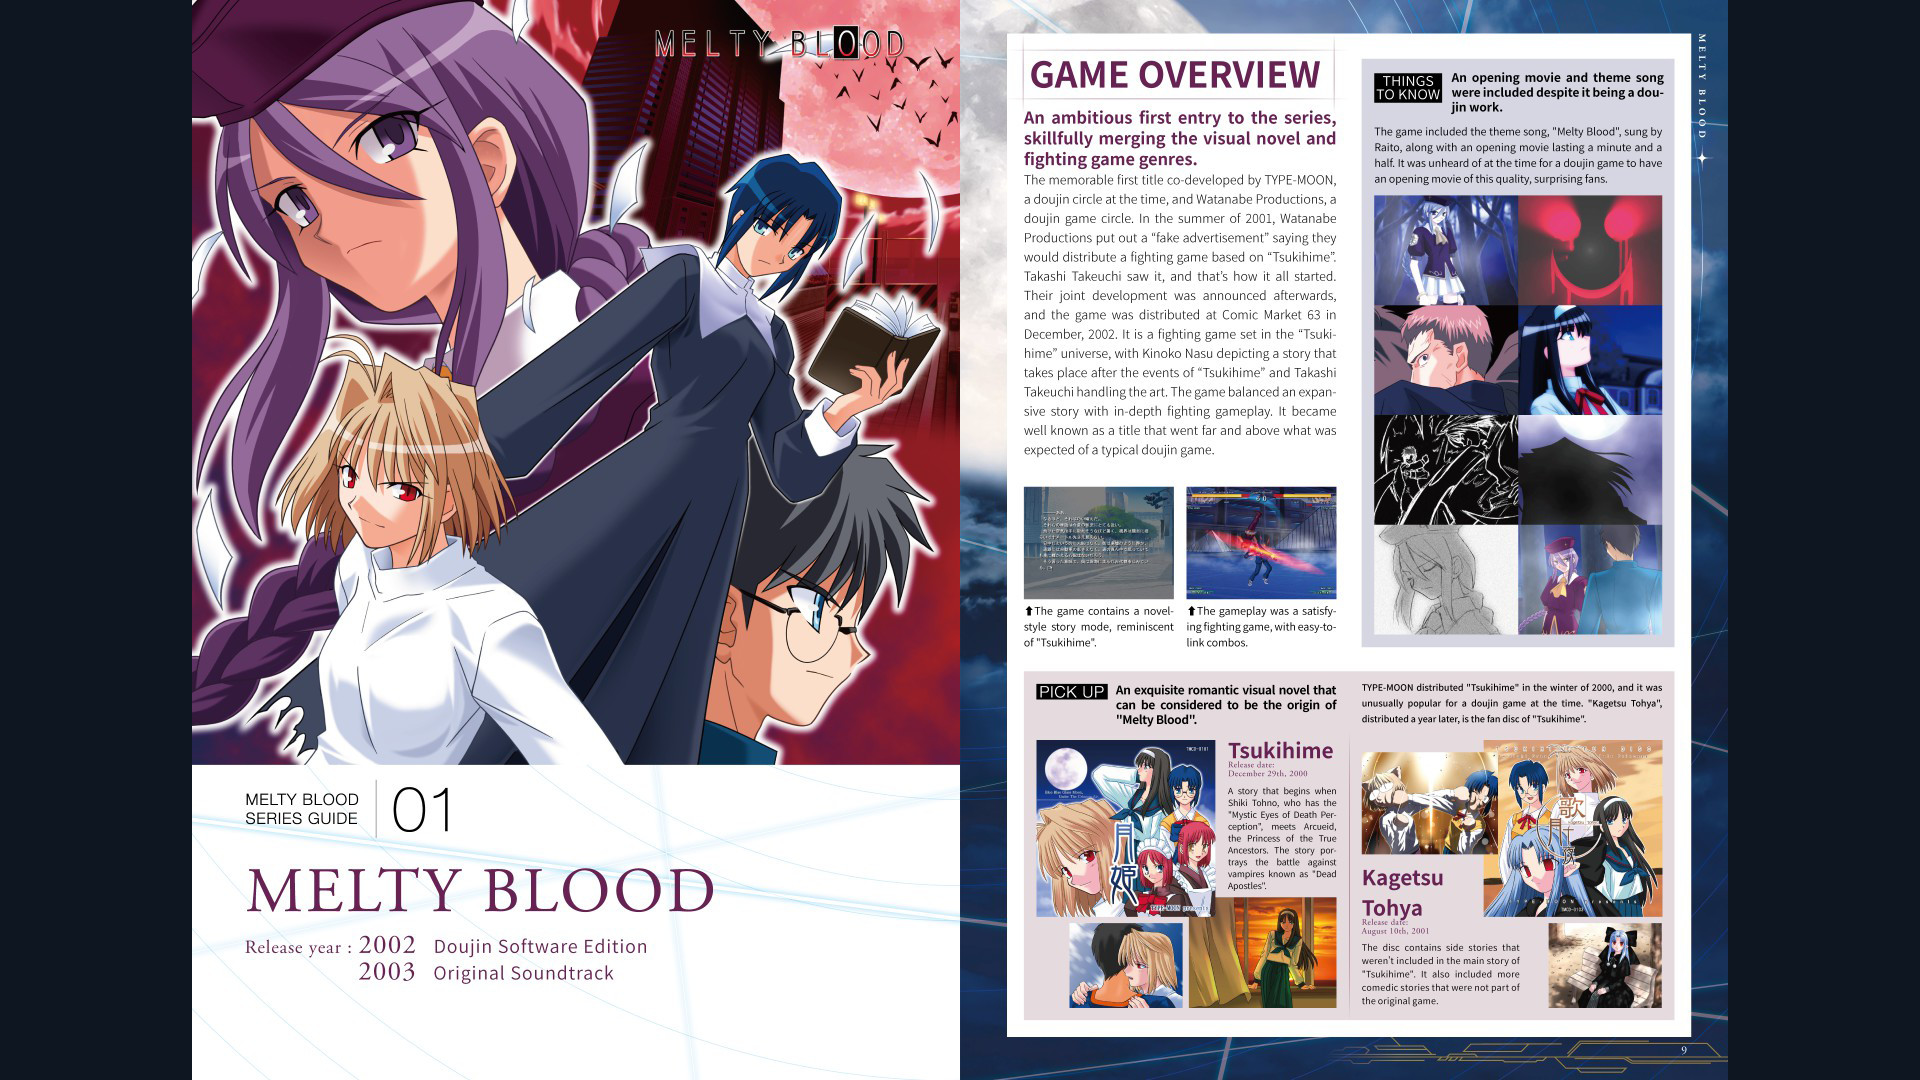 Save 50% on MELTY BLOOD ARCHIVES on Steam